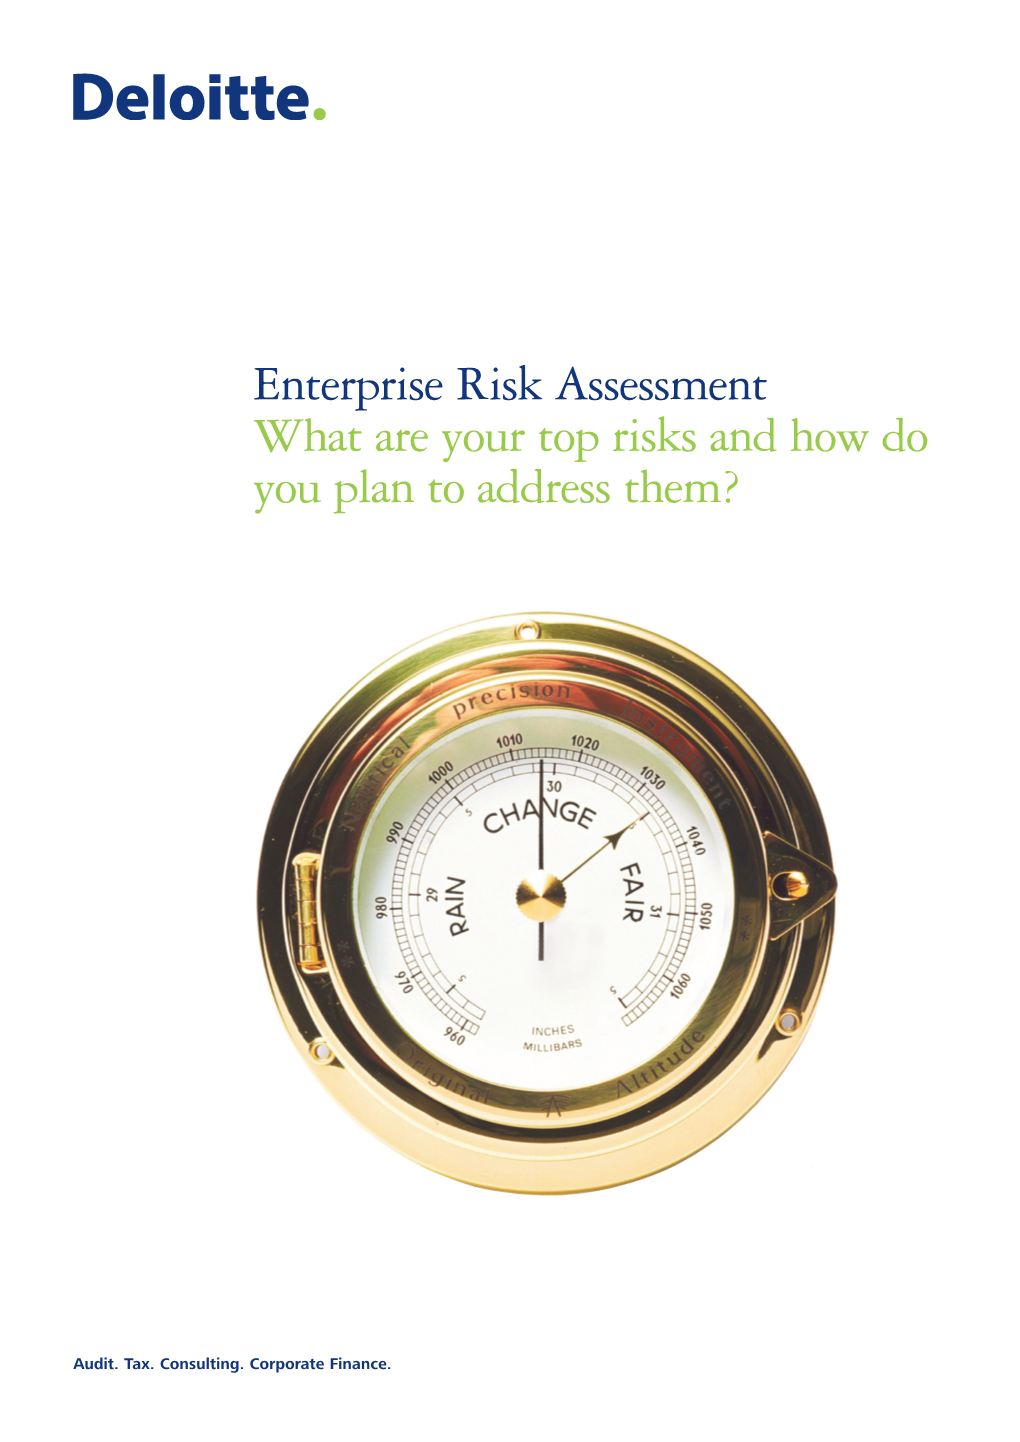 Enterprise Risk Assessment What Are Your Top Risks and How Do You Plan to Address Them?